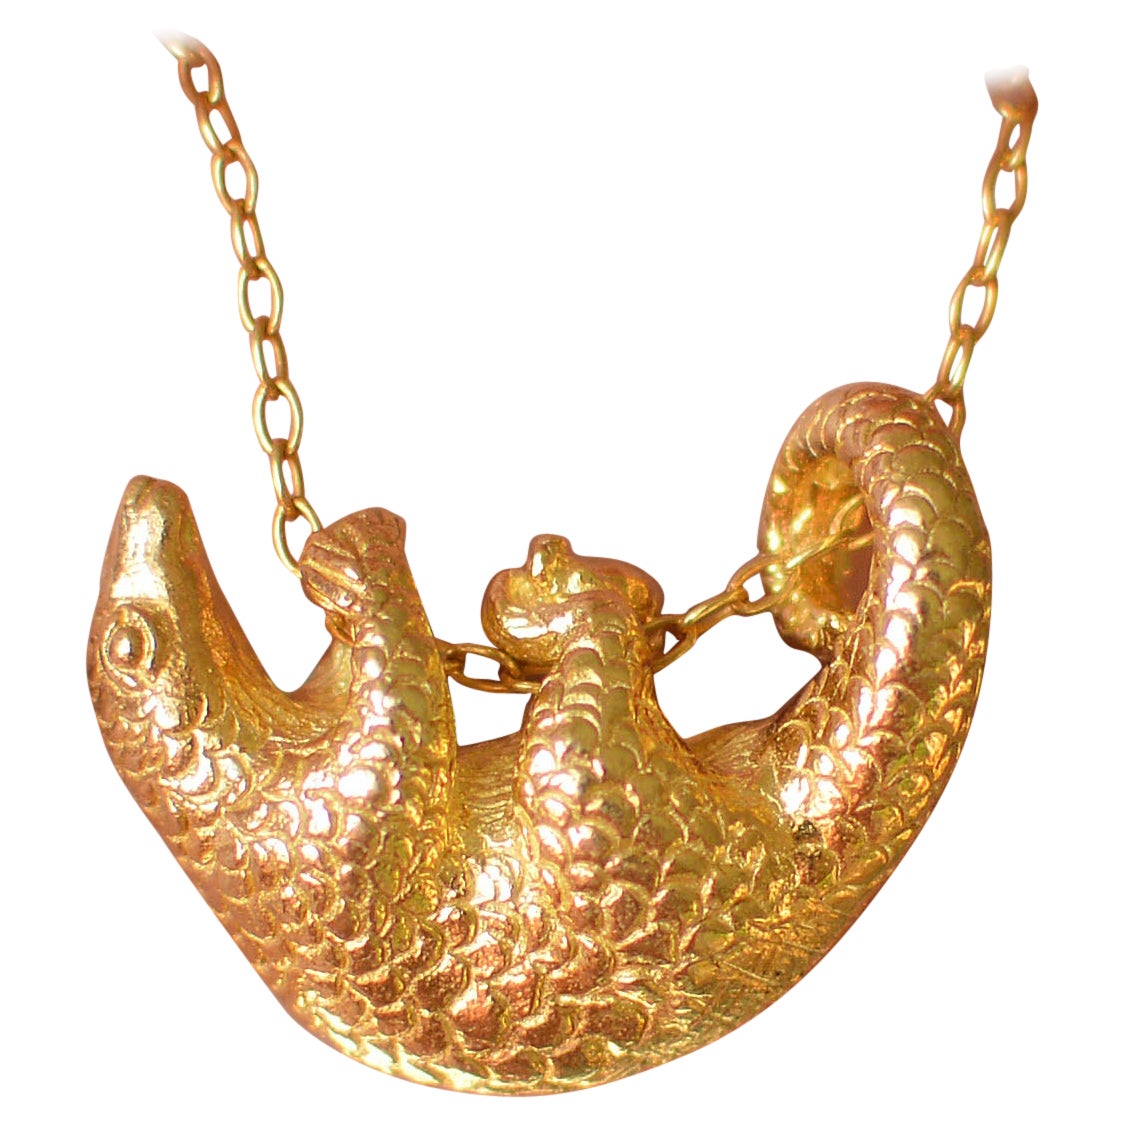 Solid 18 Carat Gold Pangolin Pendant By Lucy Stopes-Roe For Sale